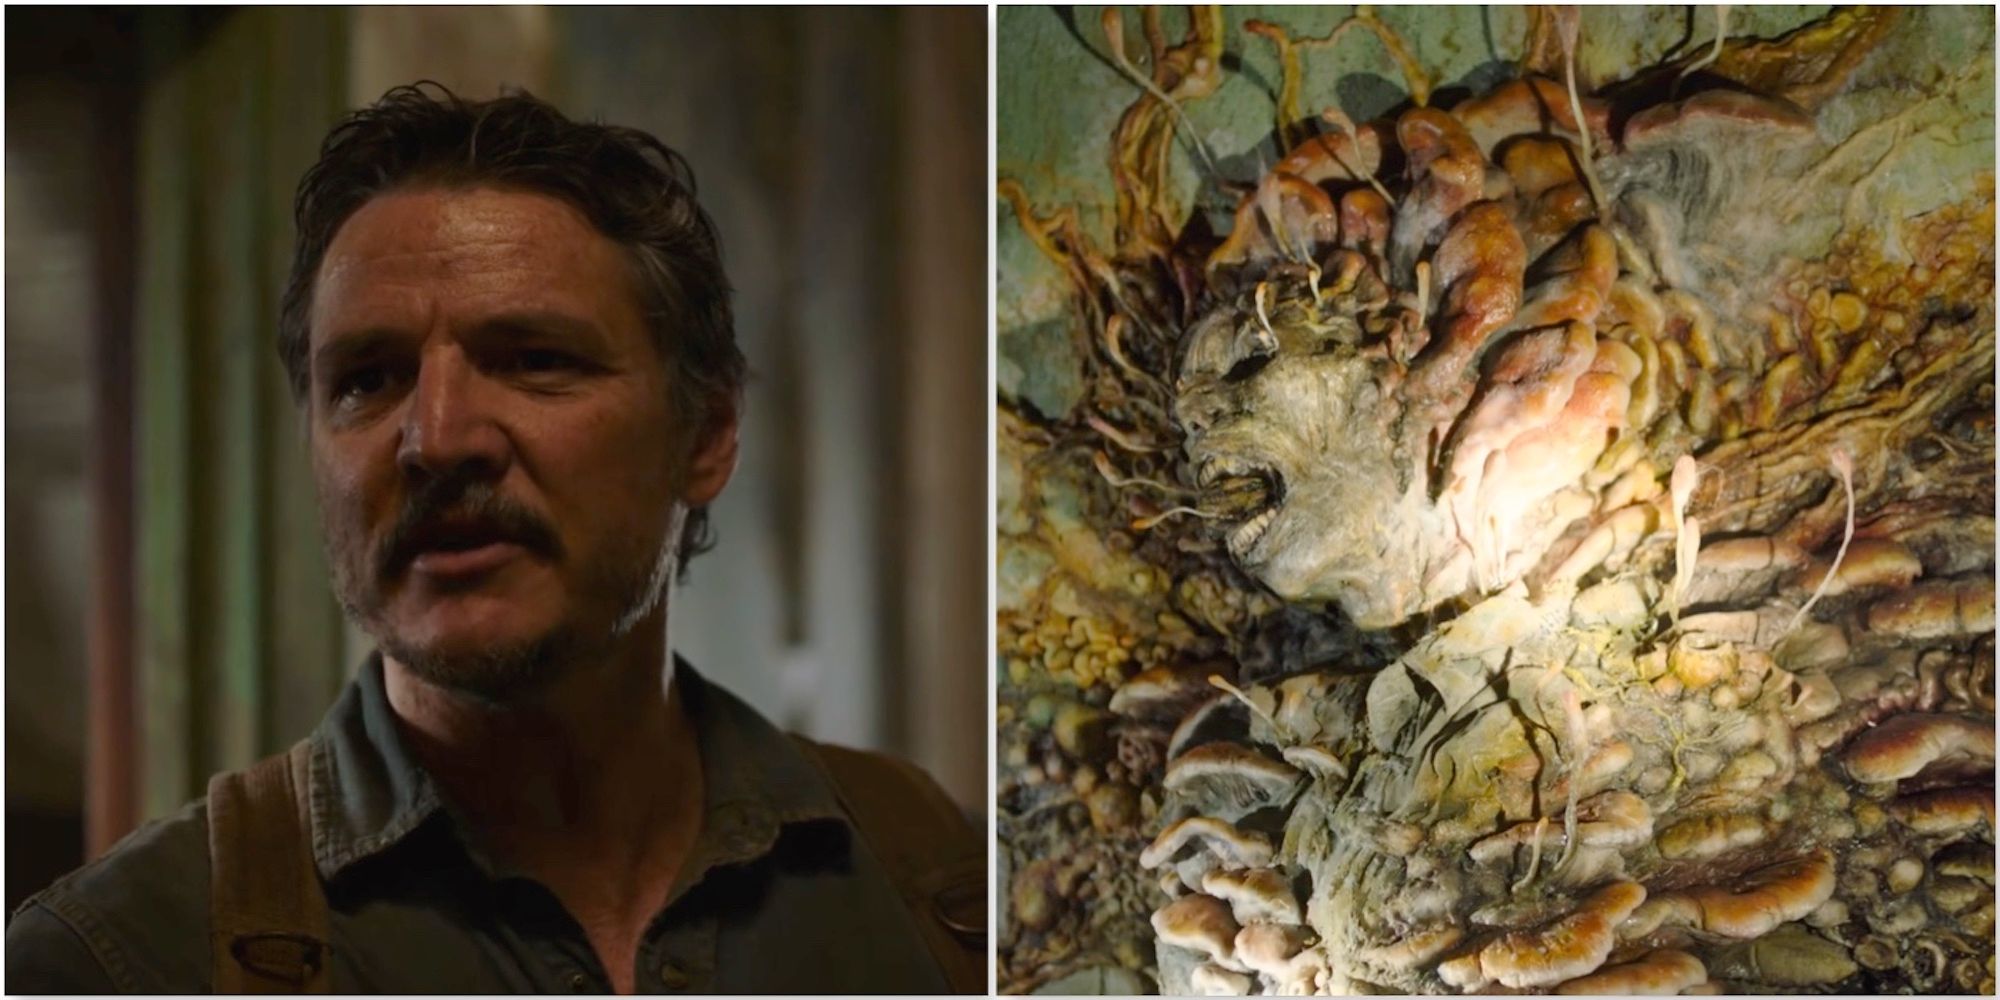 Joel and a Cordyceps monster in The Last of Us show